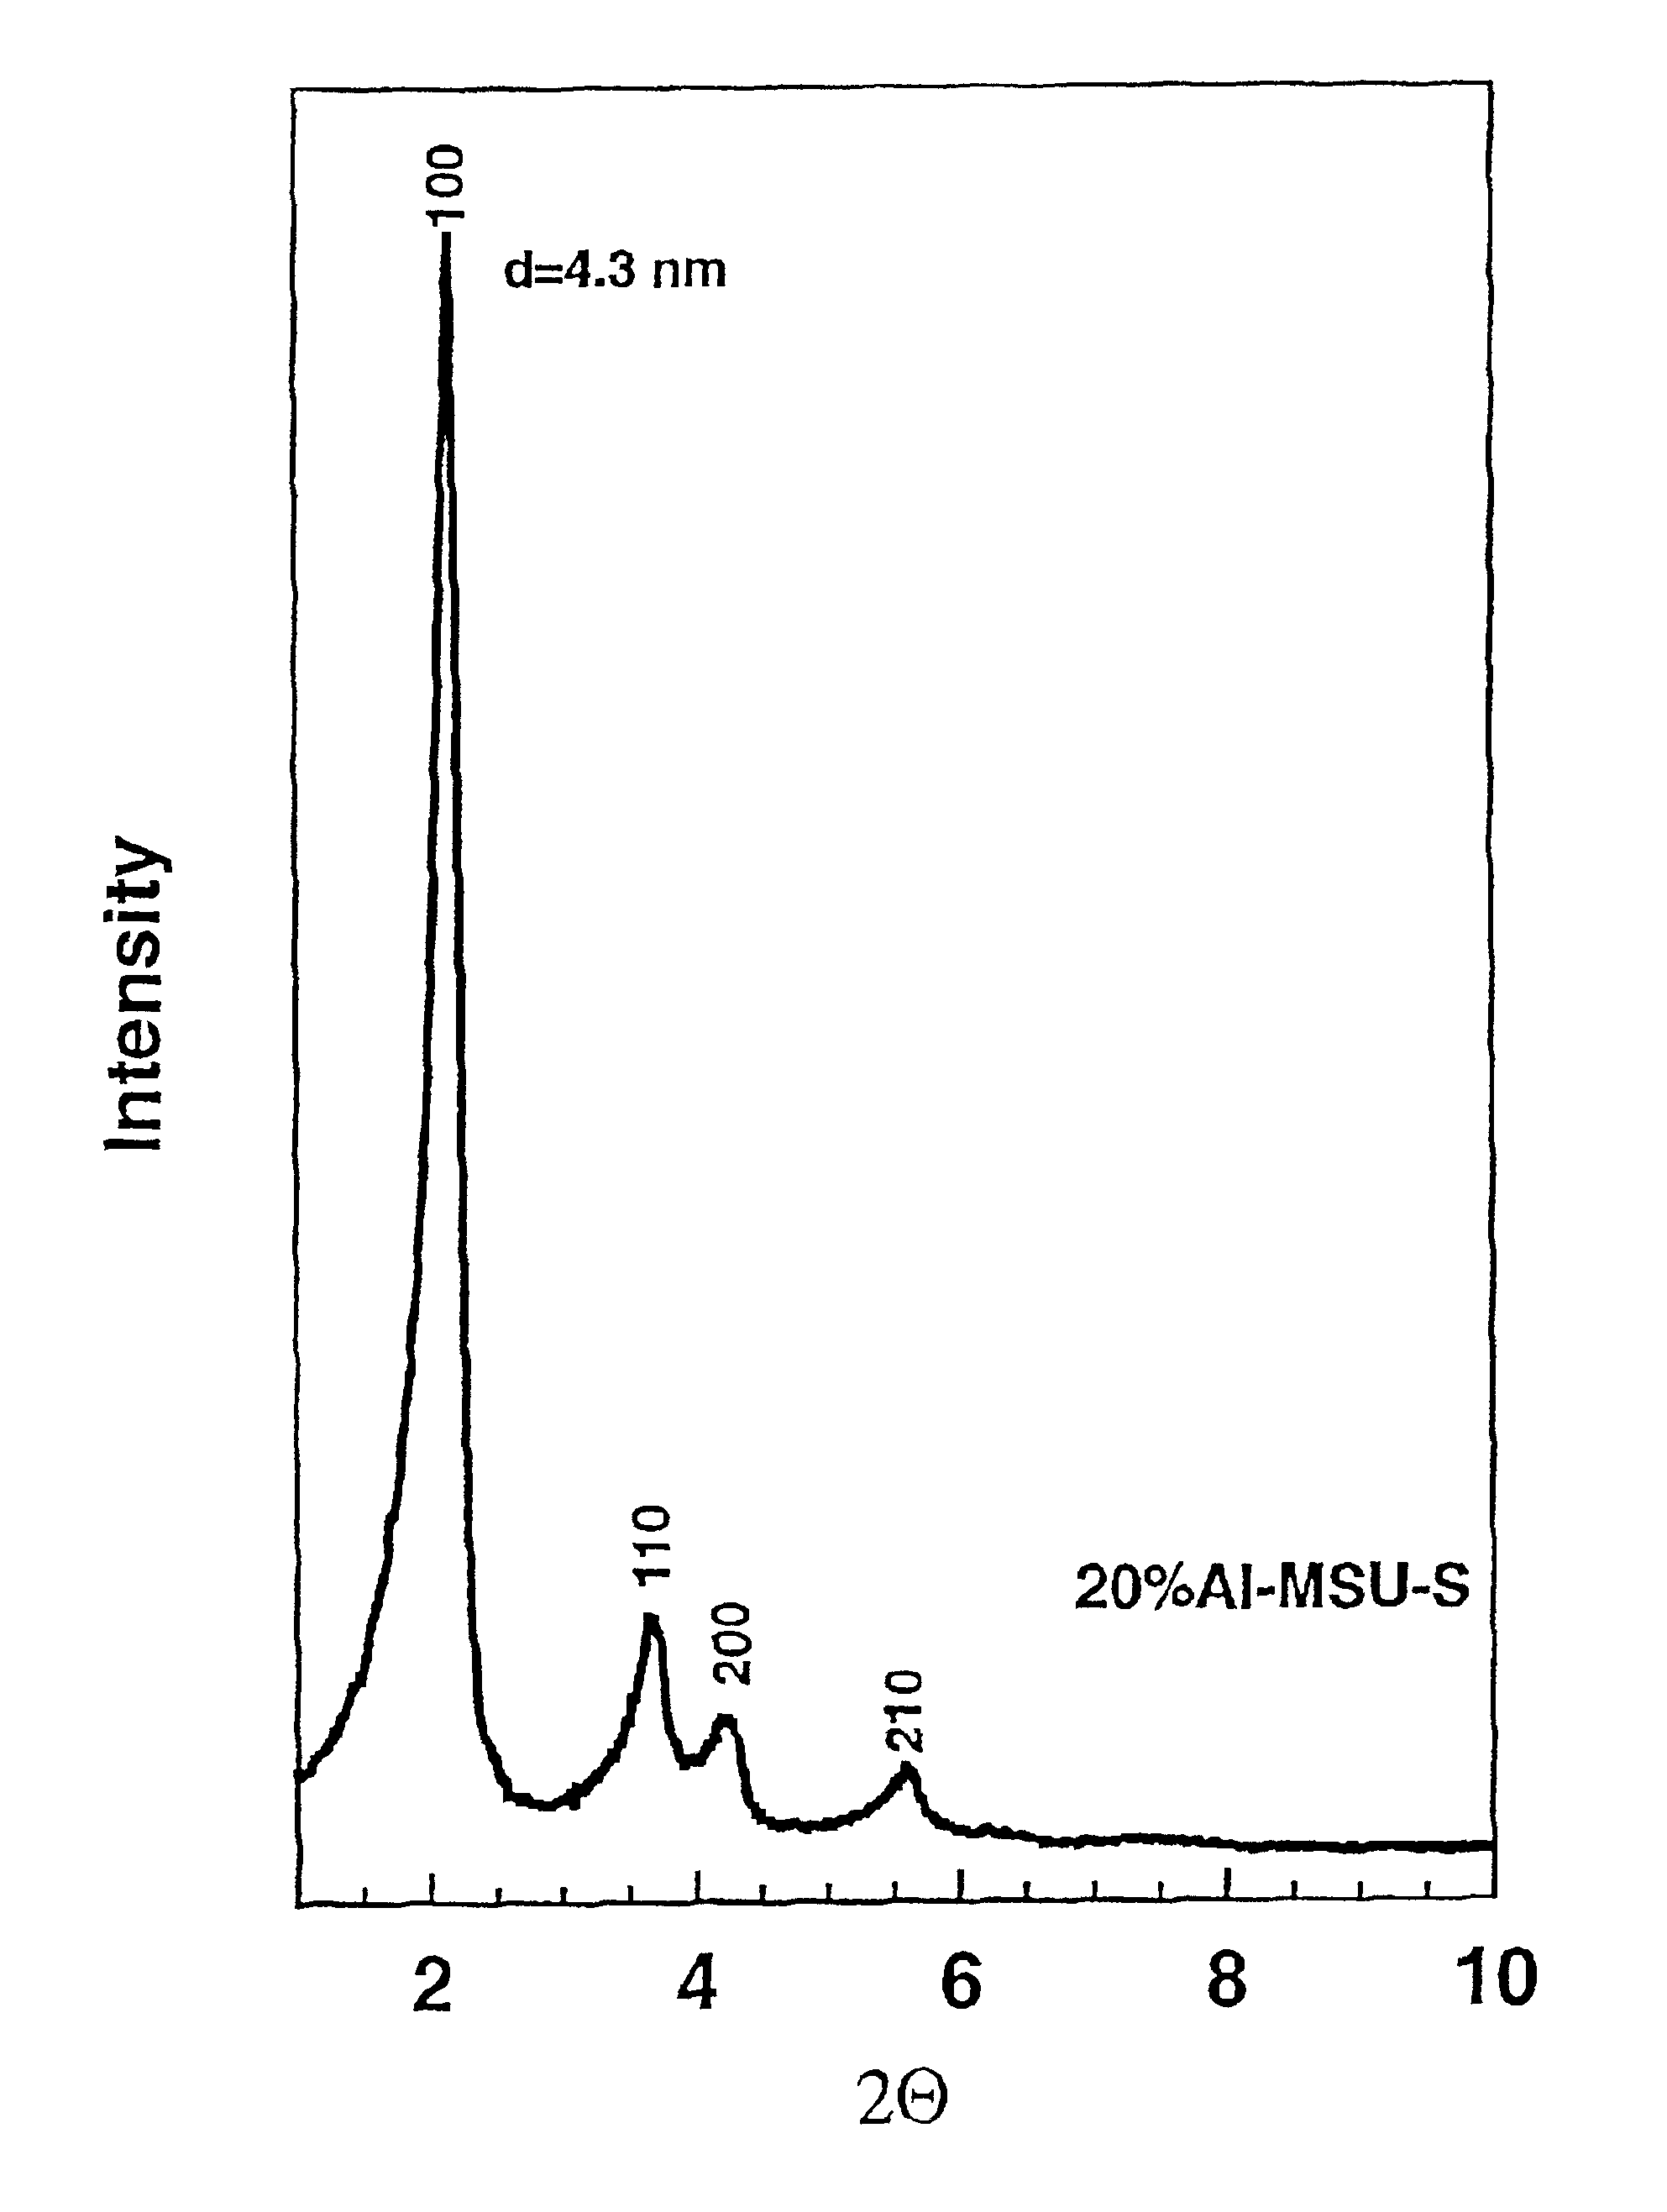 Ultrastable porous aluminosilicate structures and compositions derived therefrom